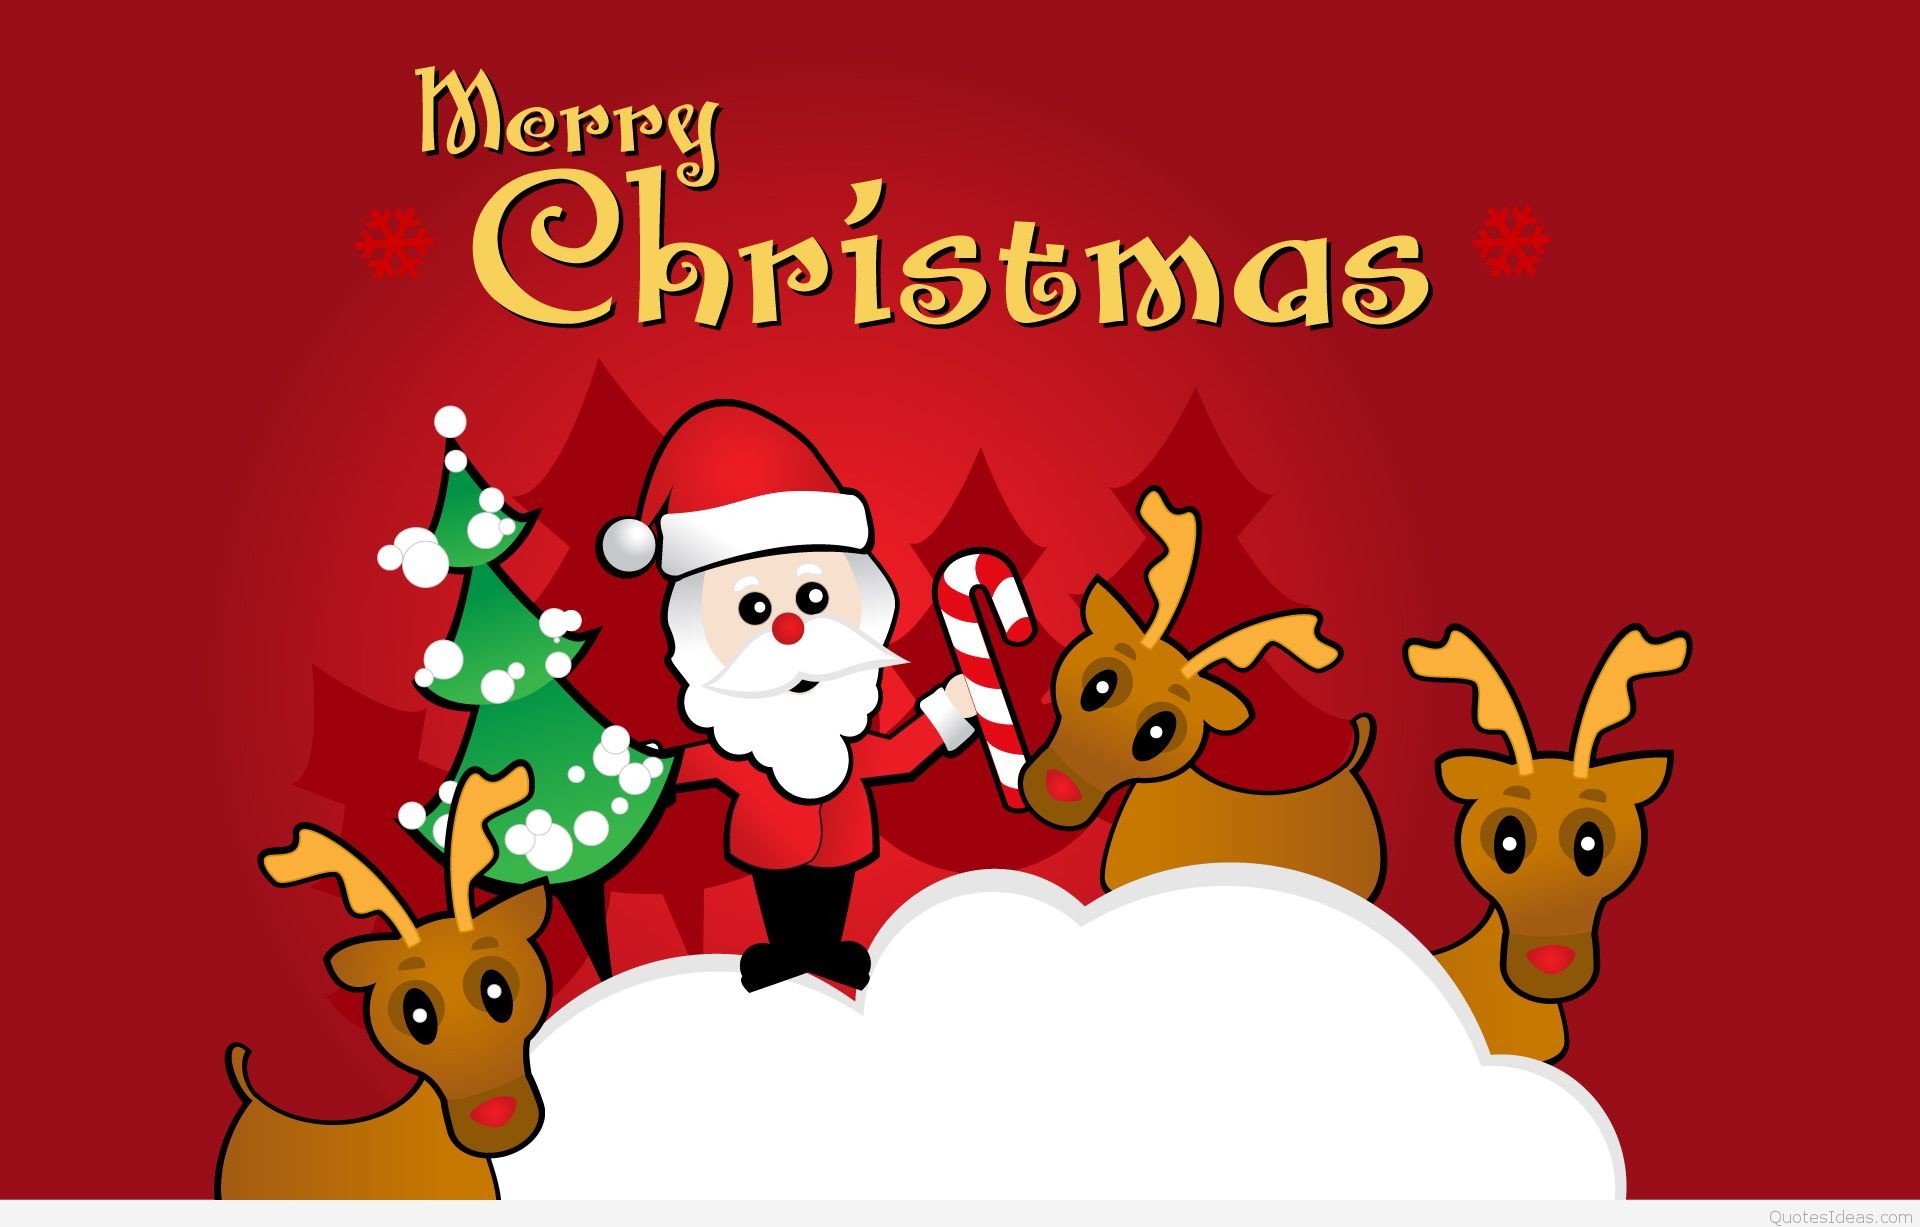 1920x1227 HD Wallpaper Card with Merry Christmas